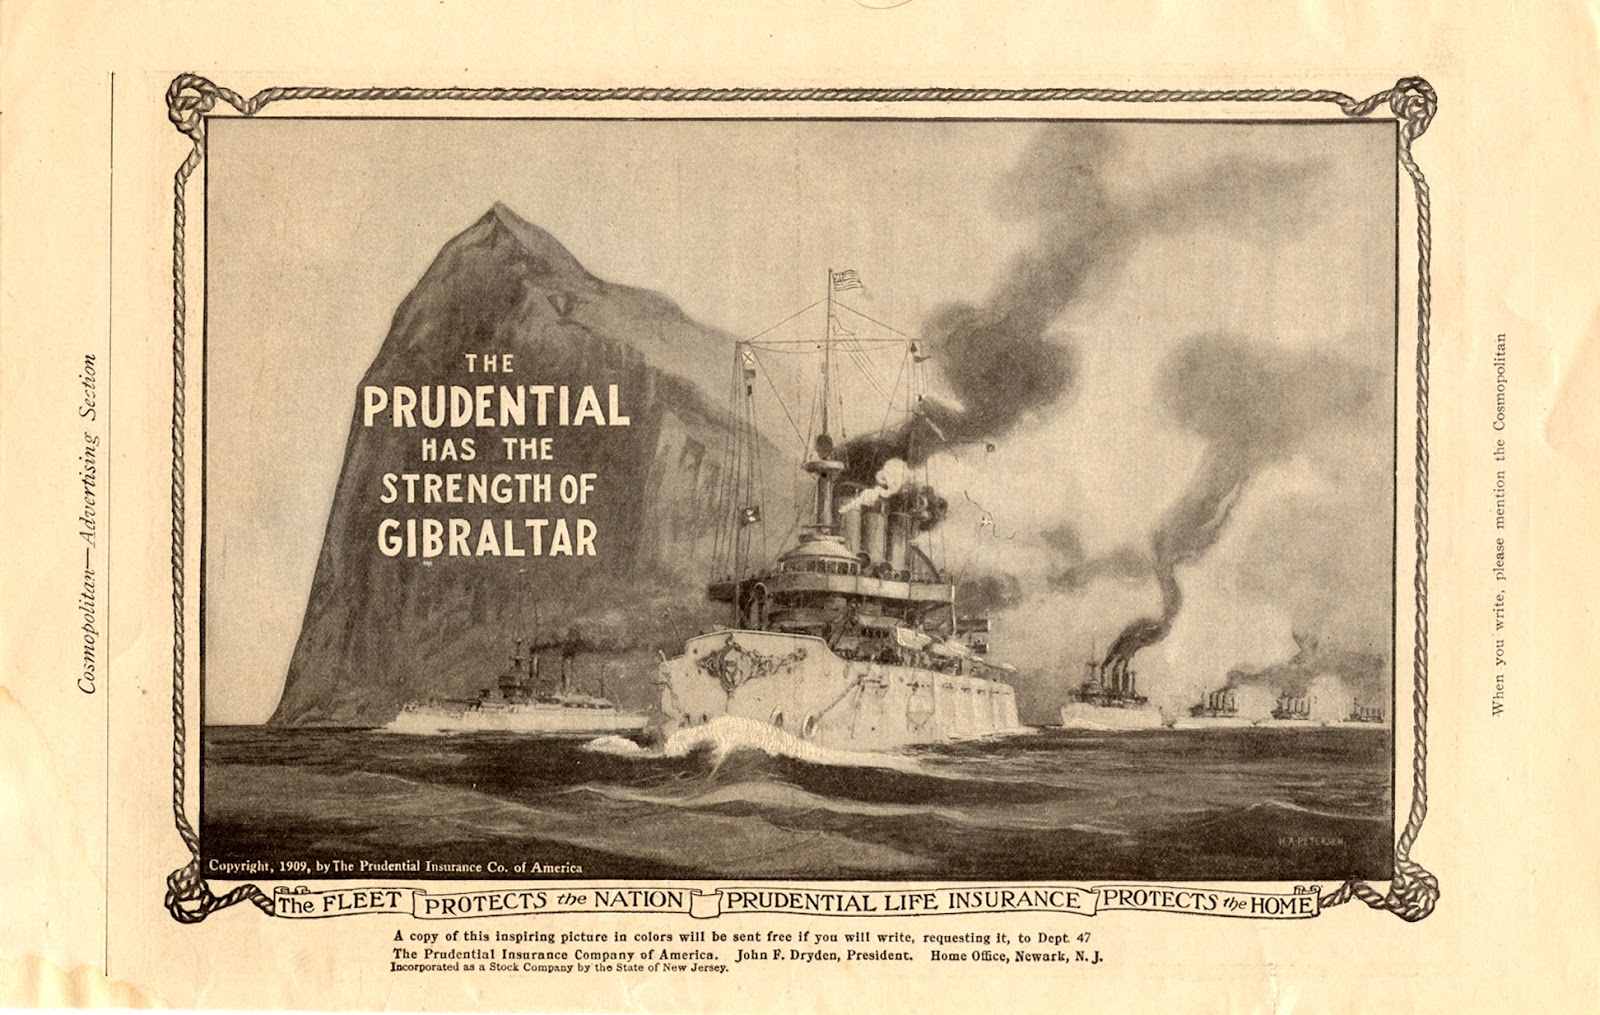 Old Ads Are Funny: 1909 ad: The Prudential has the Strength of Gibraltar